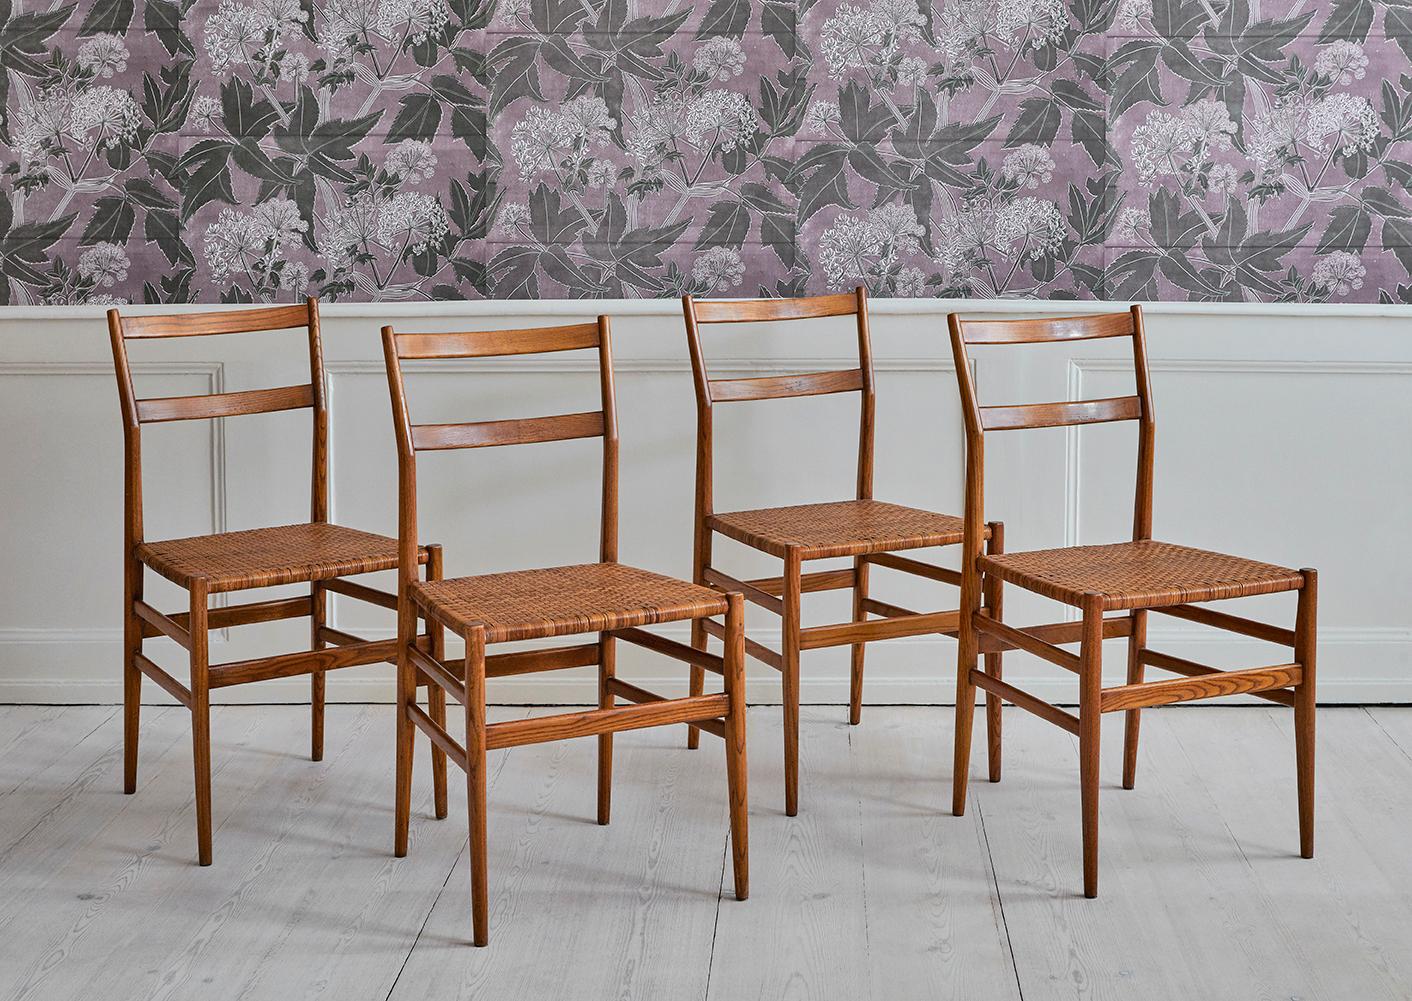 Beautiful original 'Leggera' dining chair by Gio Ponti. Ashwood and cane.

Italian designer and architect Gio Ponti (1891-1979) graduated from the Politecnico di Milano, where he later became a professor. His buildings include the Littoria Tower